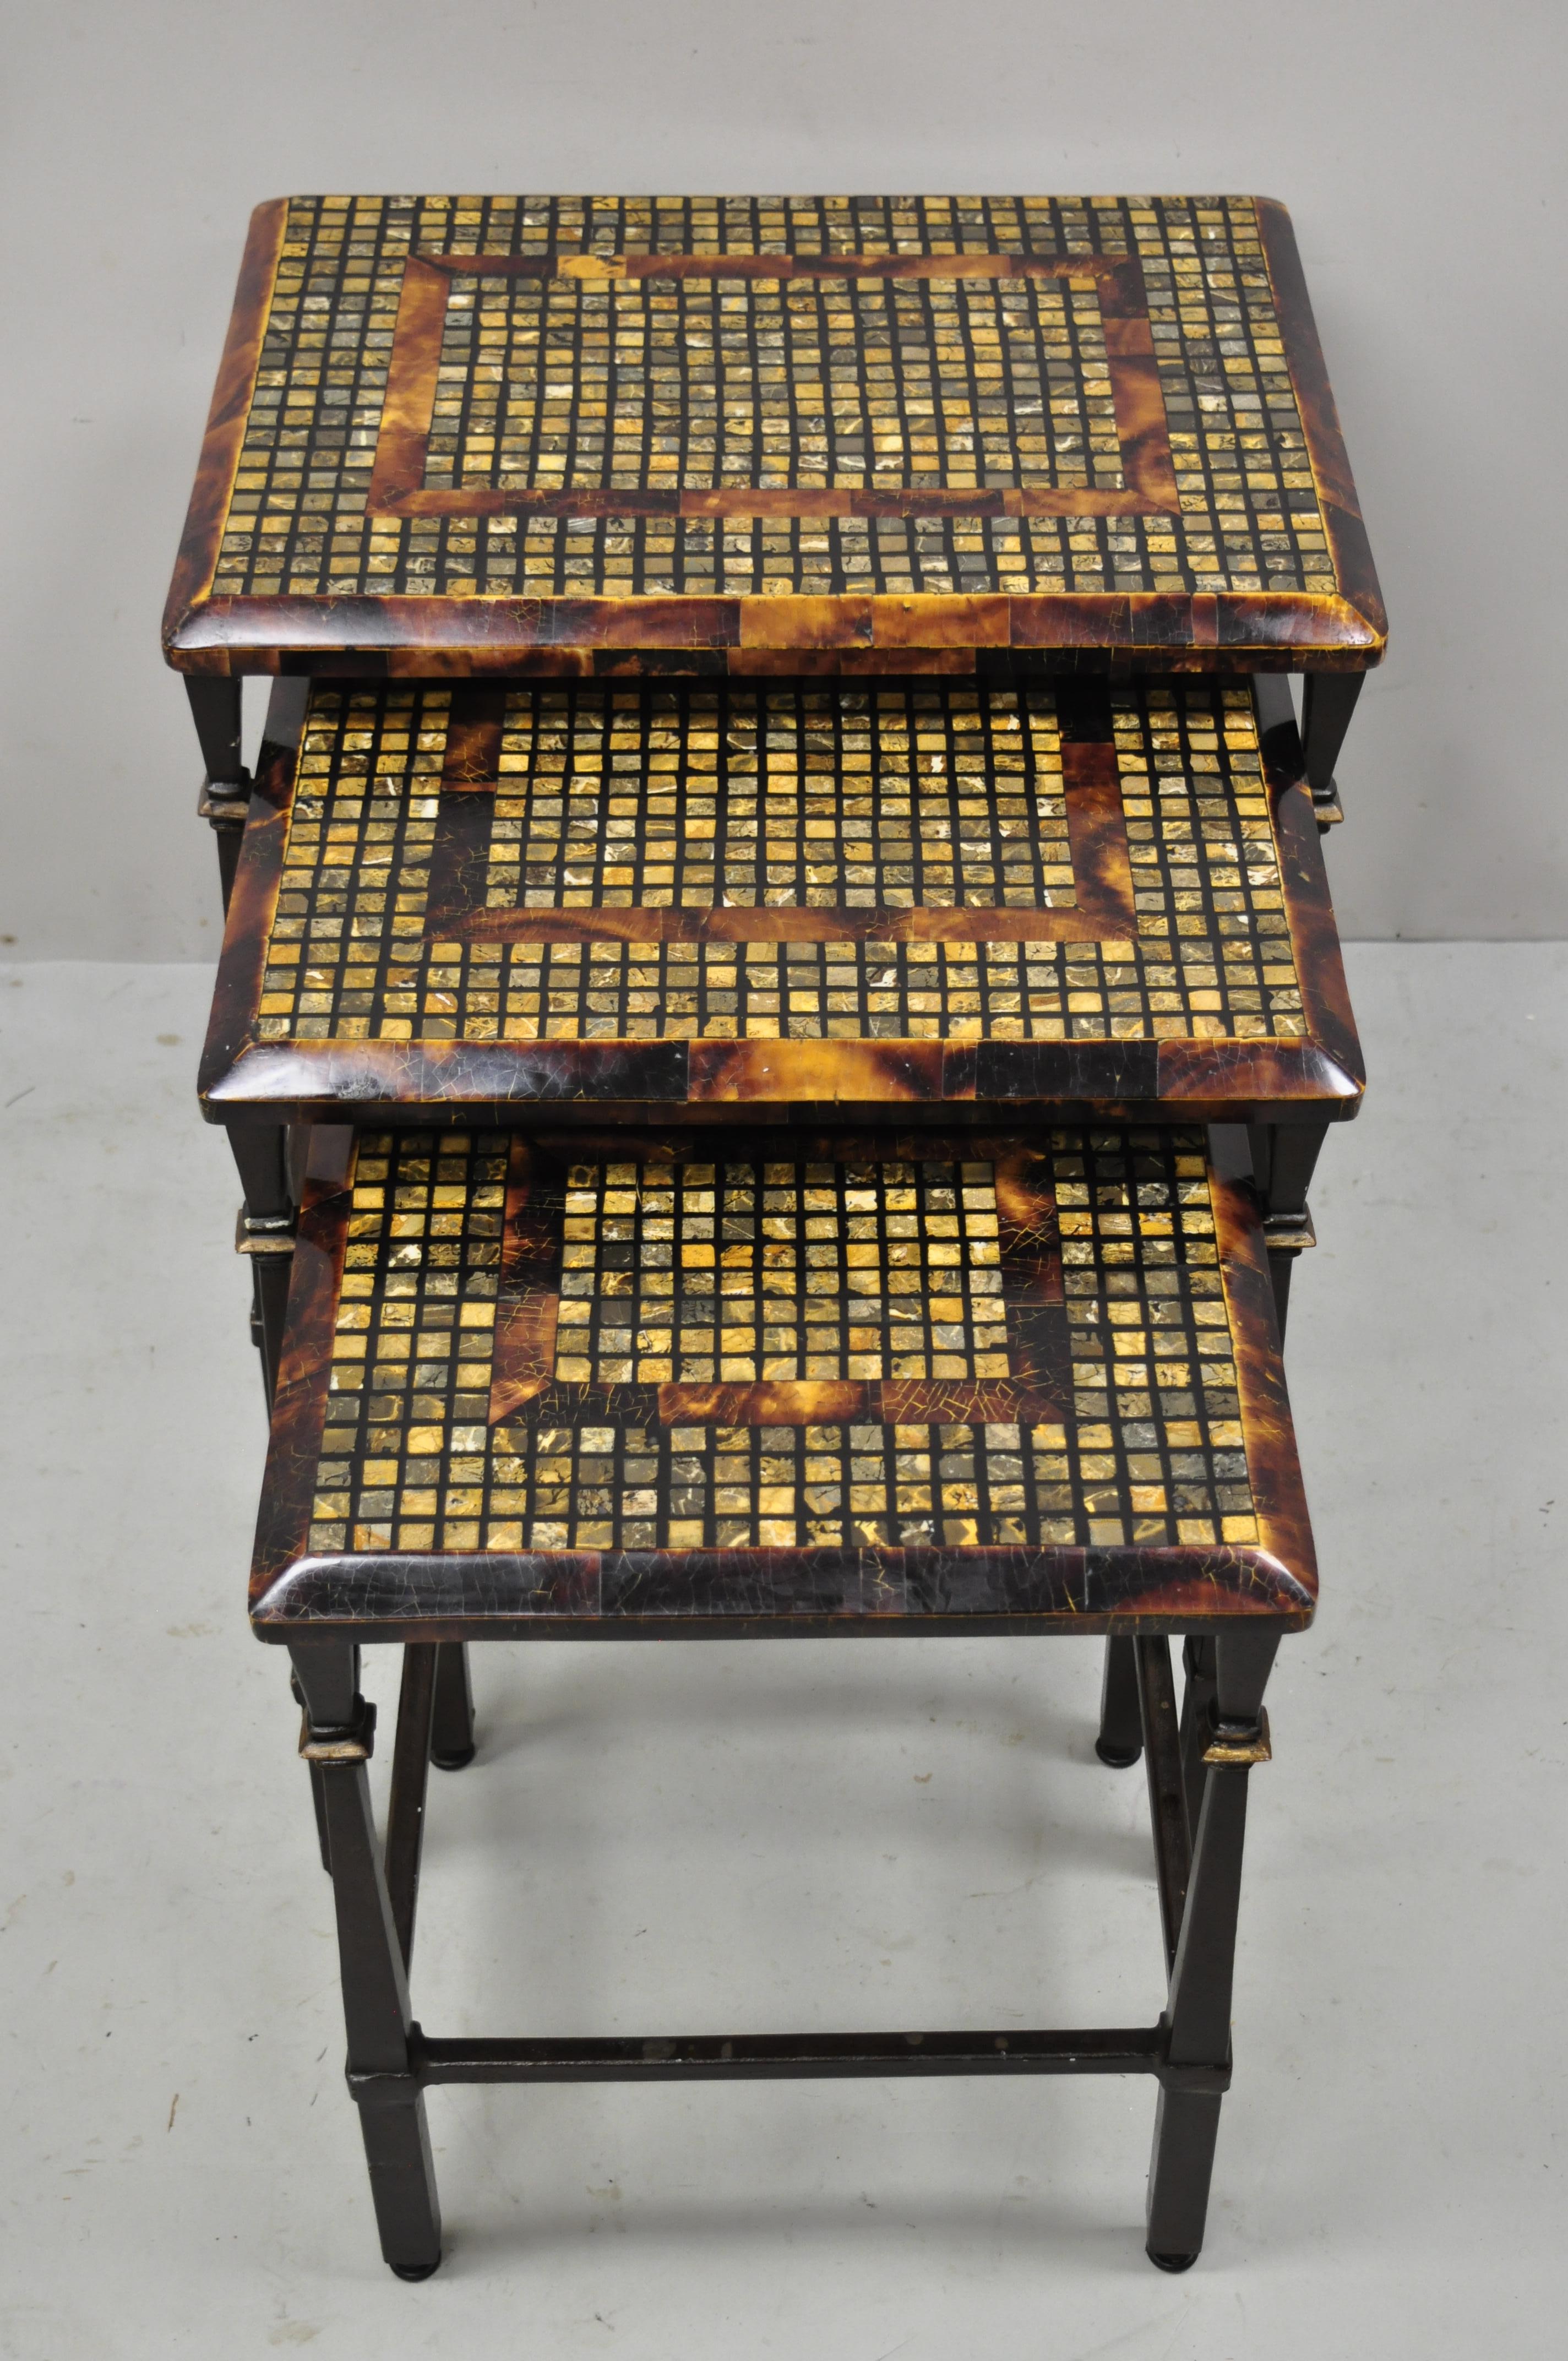 Faux tortoise shell mosaic stone inlay Mediterranean style nesting side tables by Hooker Furniture. Set includes 3 graduating size tables, faux tortoise shell and mosaic stone inlay tops, metal bases, original label, great style and form. Circa